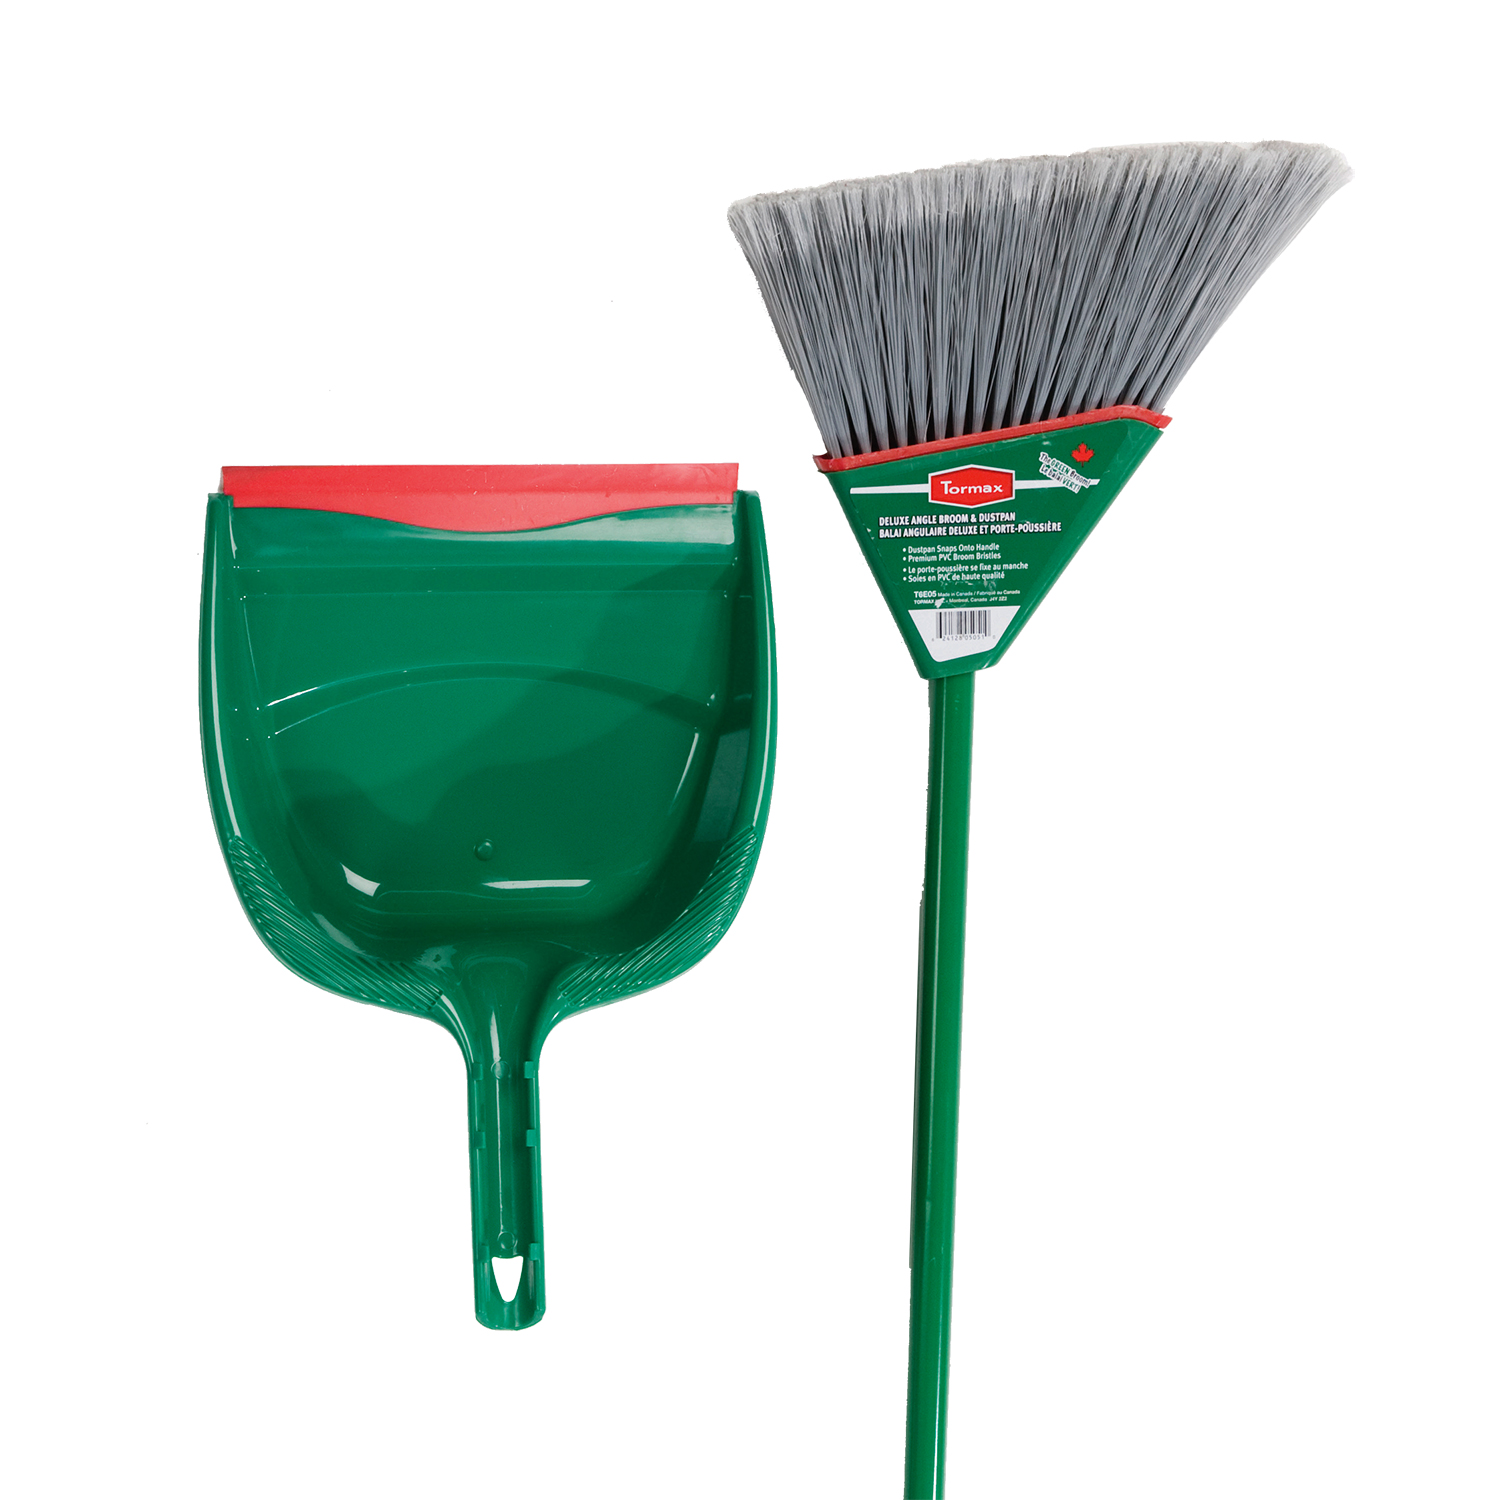 Tormax - Deluxe angle broom and dustpan